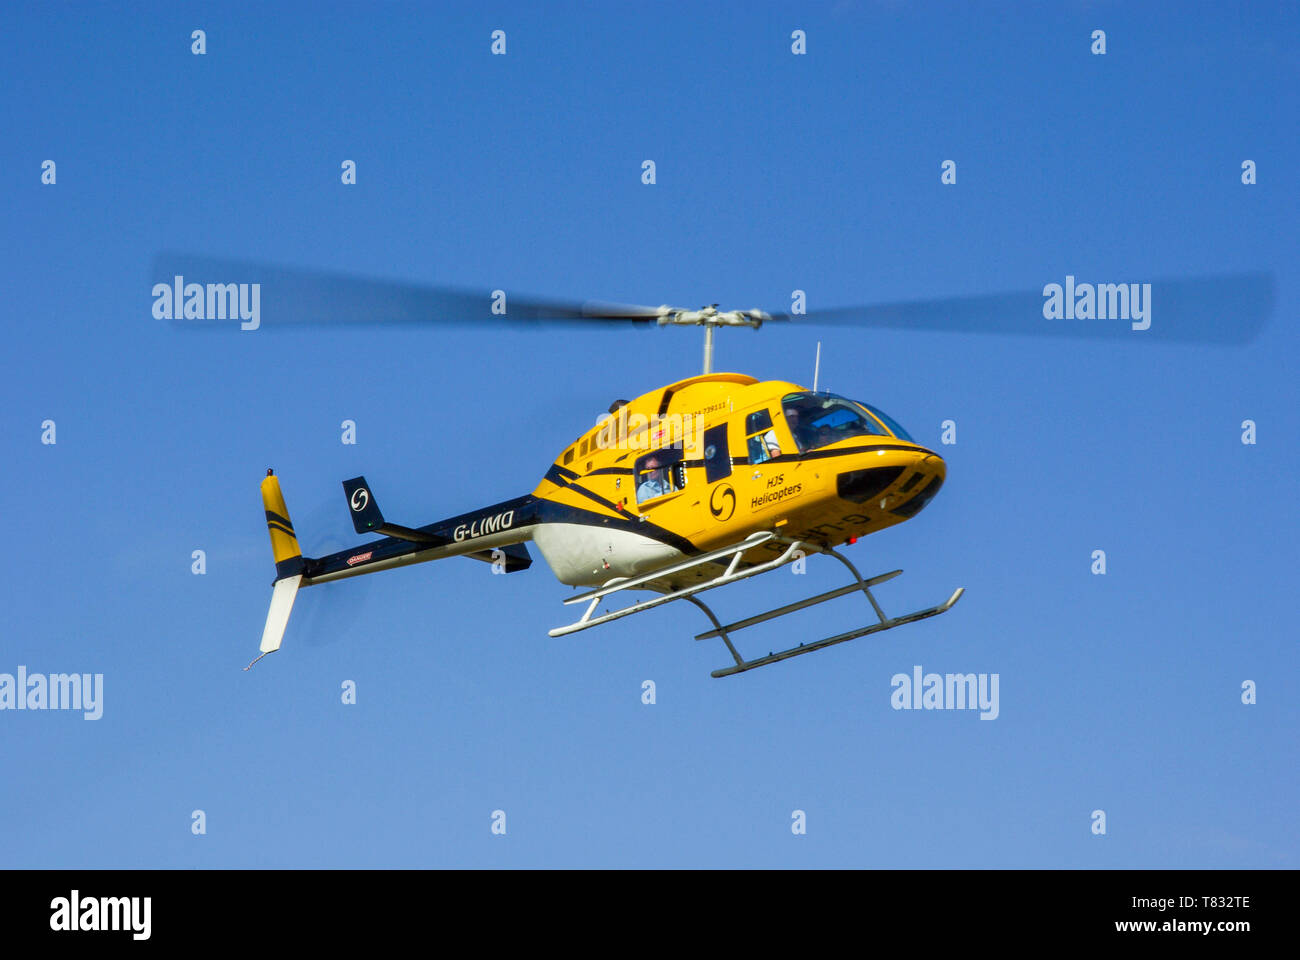 Executive Helicopter High Resolution Stock Photography and Images - Alamy